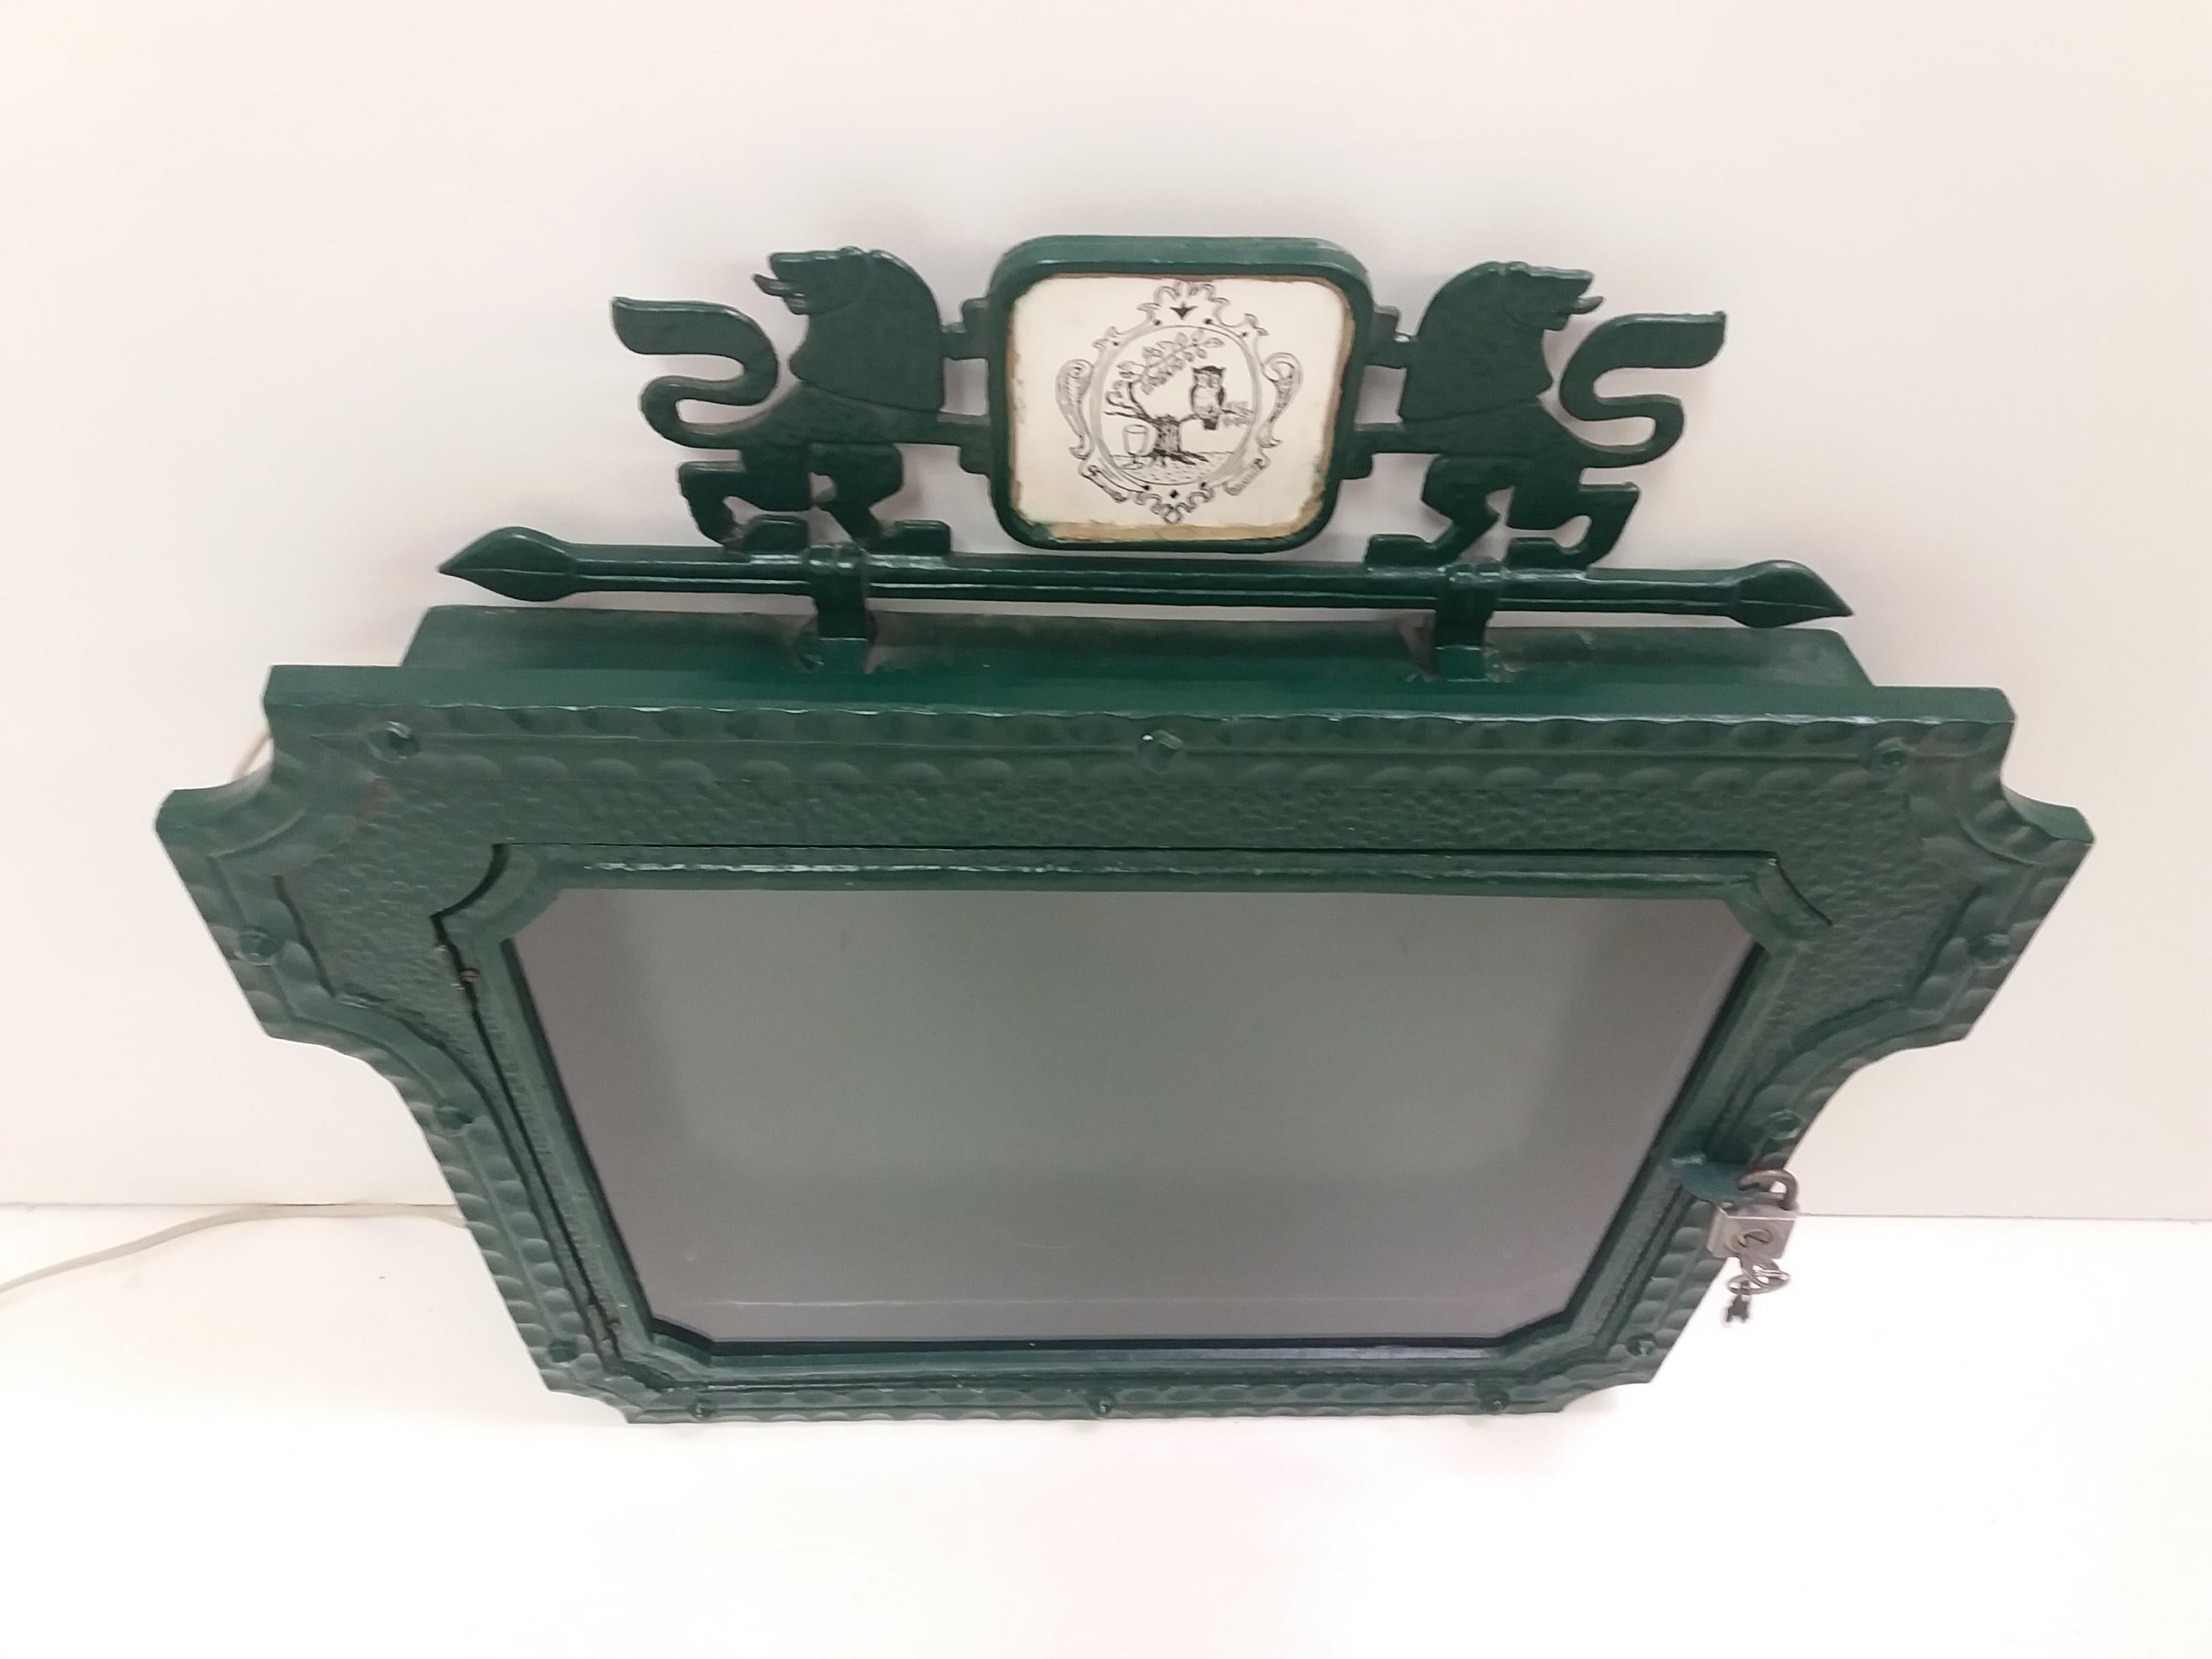 - Made in Czechoslovakia
- Made of cast iron, glass
- With lighting and locking
- Originally located at the entrance to the hotel or restaurant
- Good, original condition.